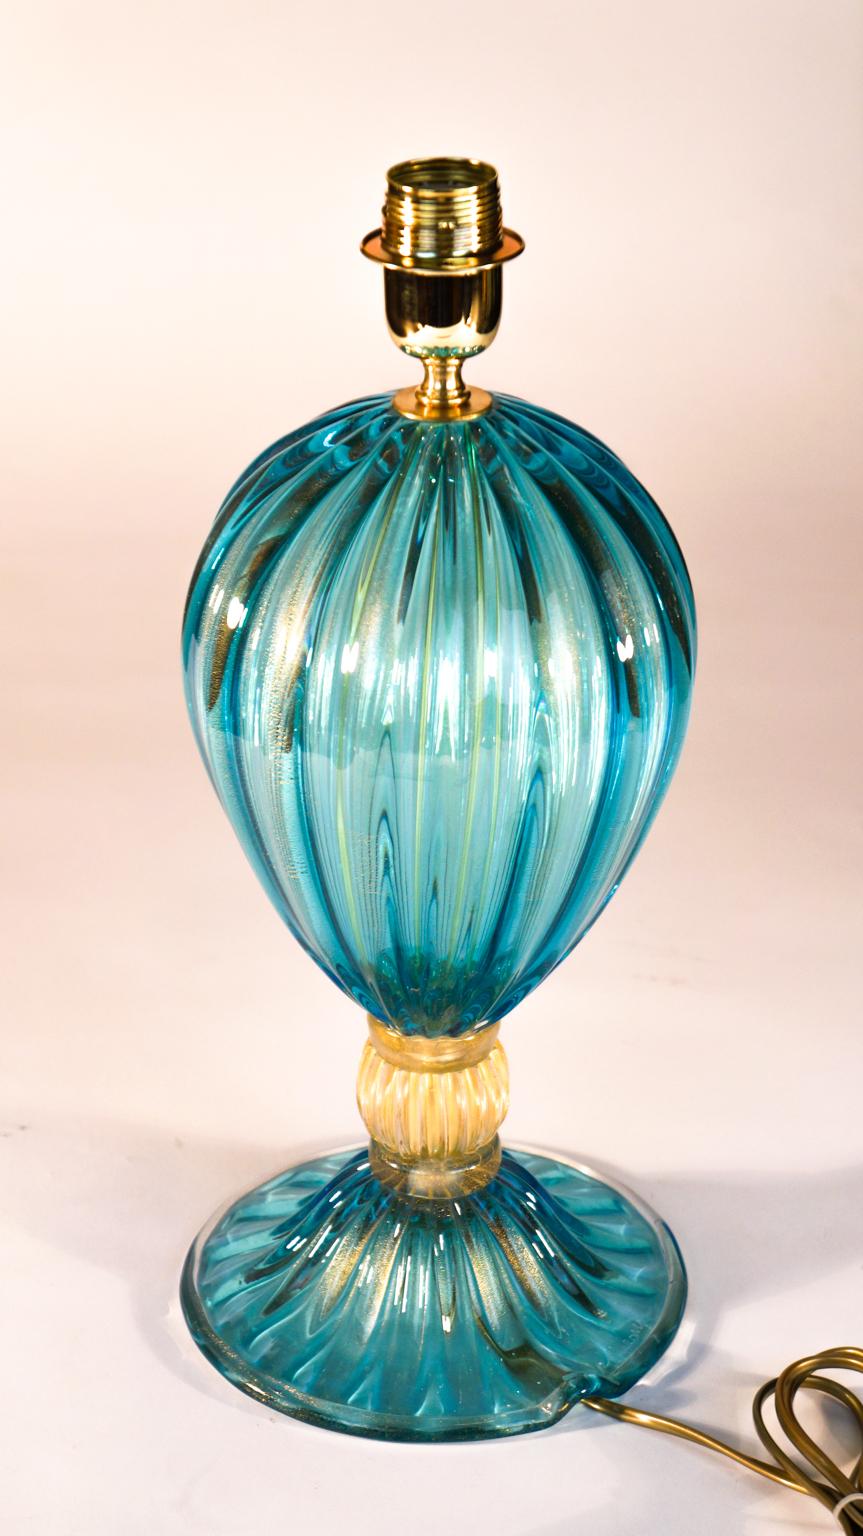 Alberto Donà Pair of Light Blue Italian Murano Glass Table Lamps Veronese, 1980s For Sale 1